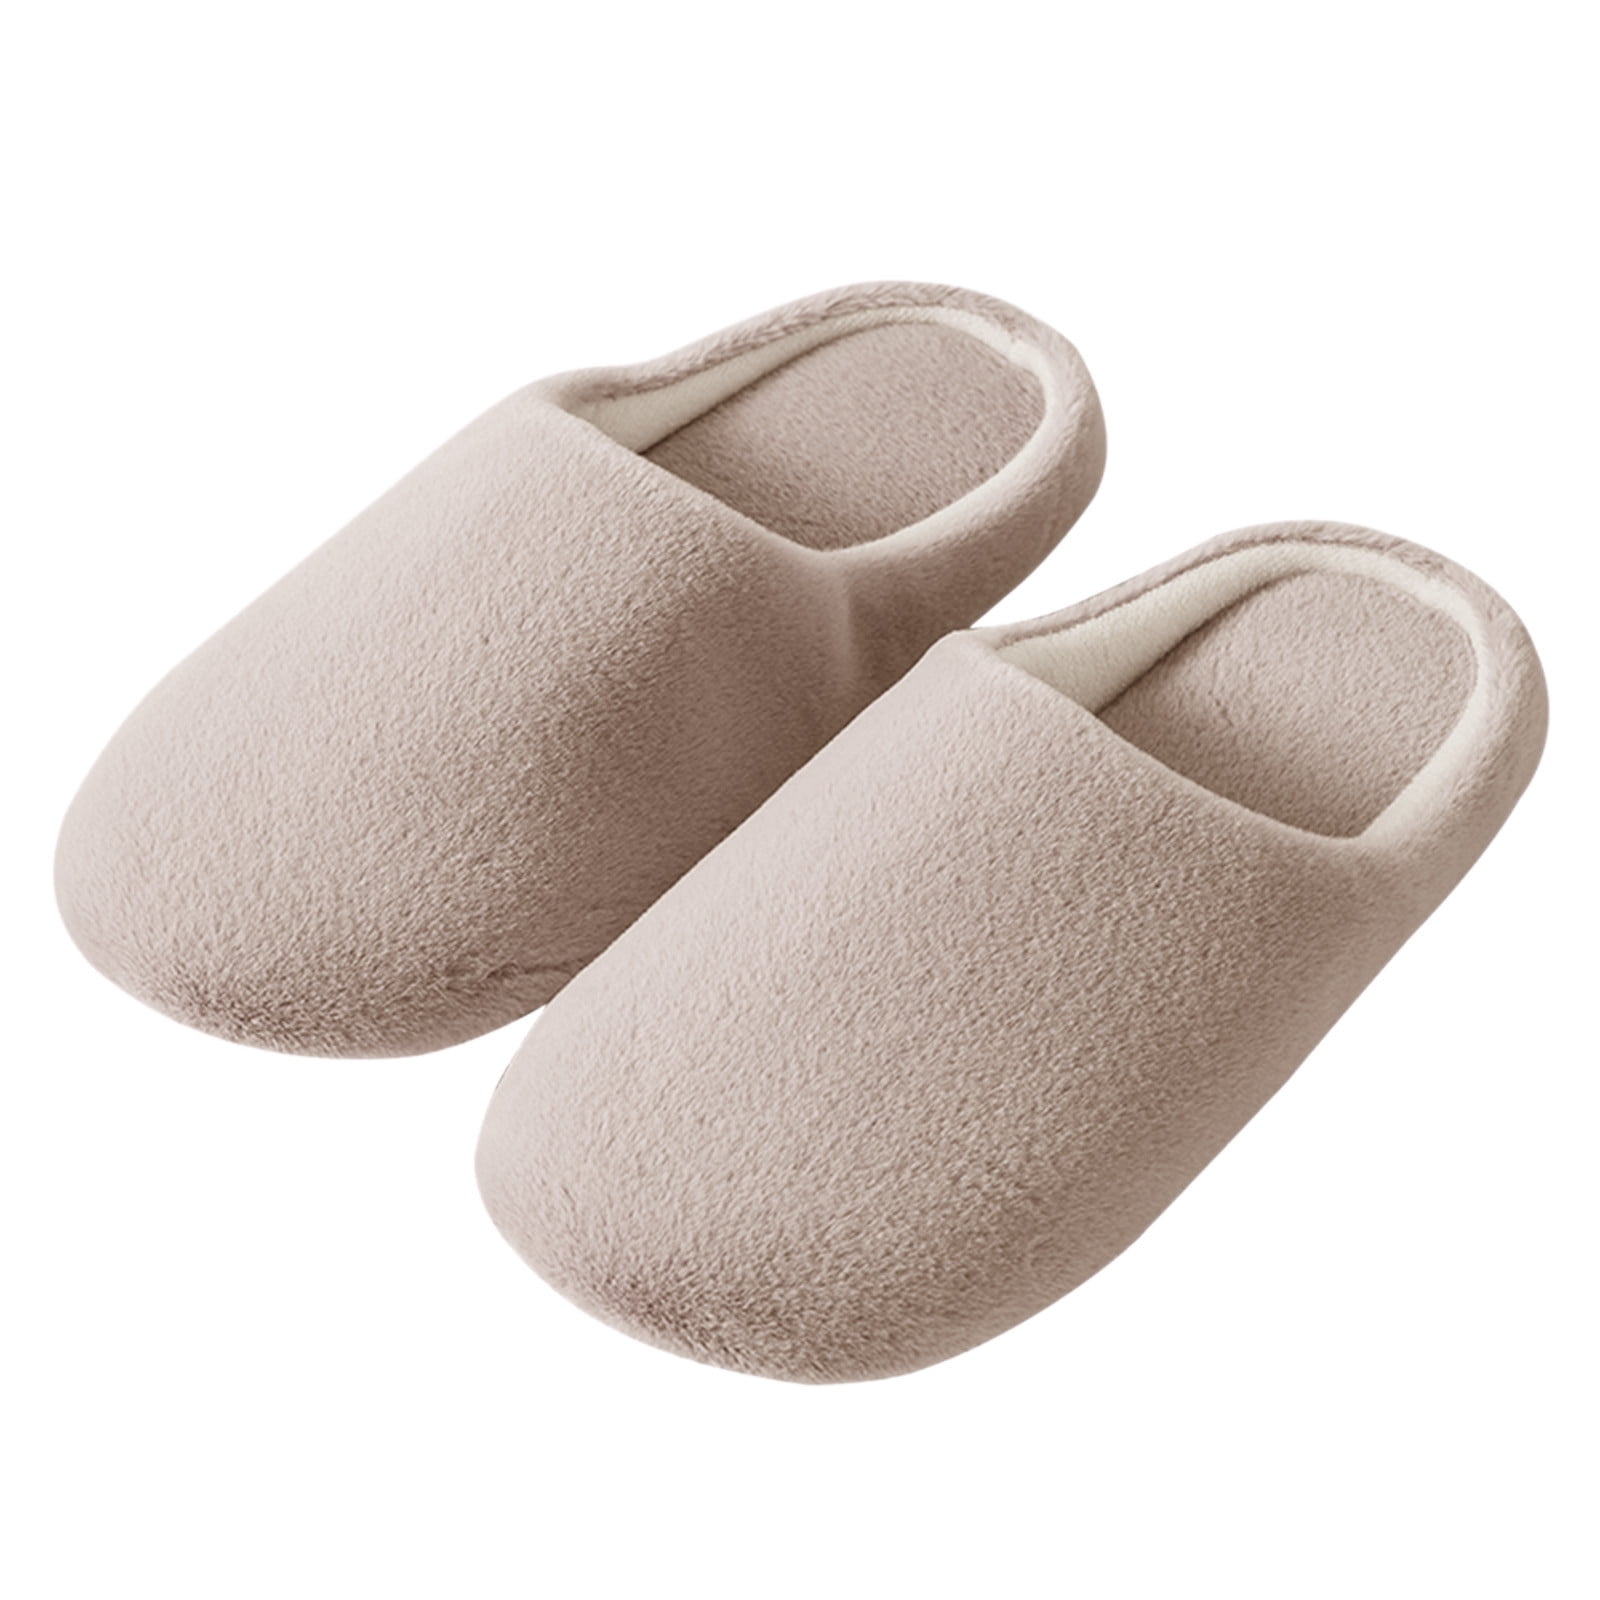 HomeTop Men's Comfort Memory Foam Moccasin Slippers Breathable Cotton Knit  Terry Cloth House Shoes - Walmart.com